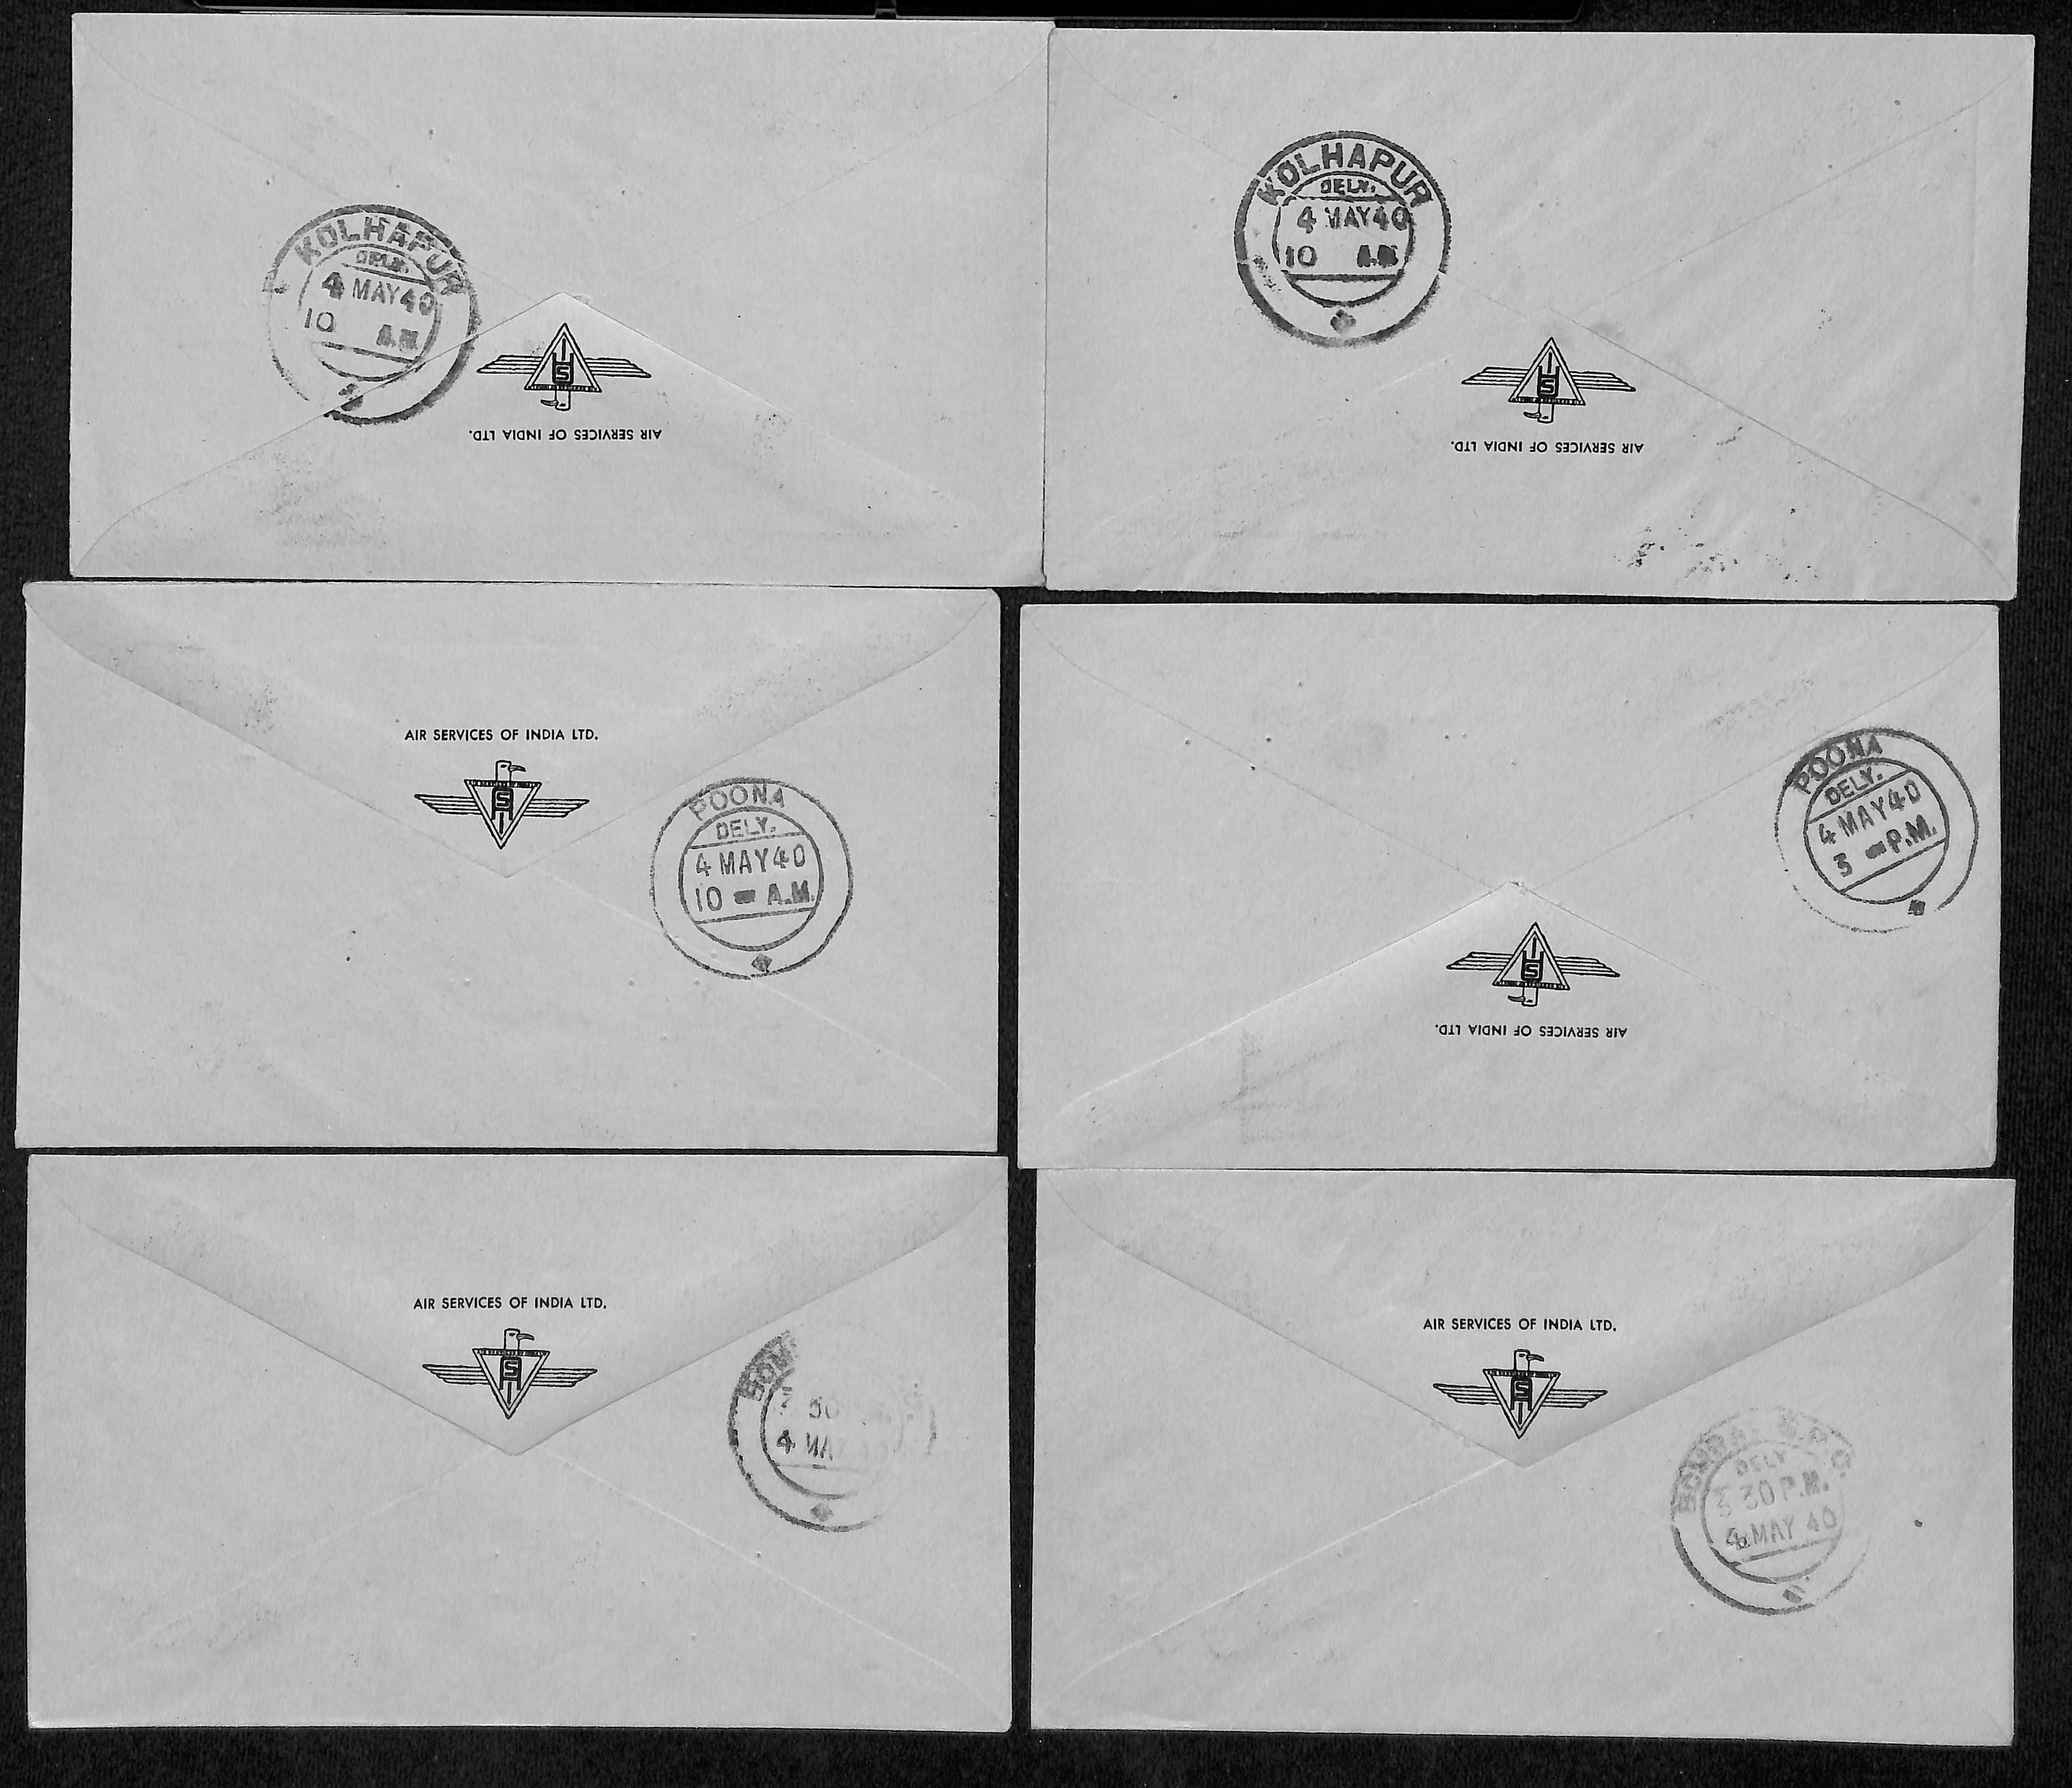 1940 (May 4) Air Services of India Kolhapur to Bombay service via Poona, covers carried on all - Image 2 of 2